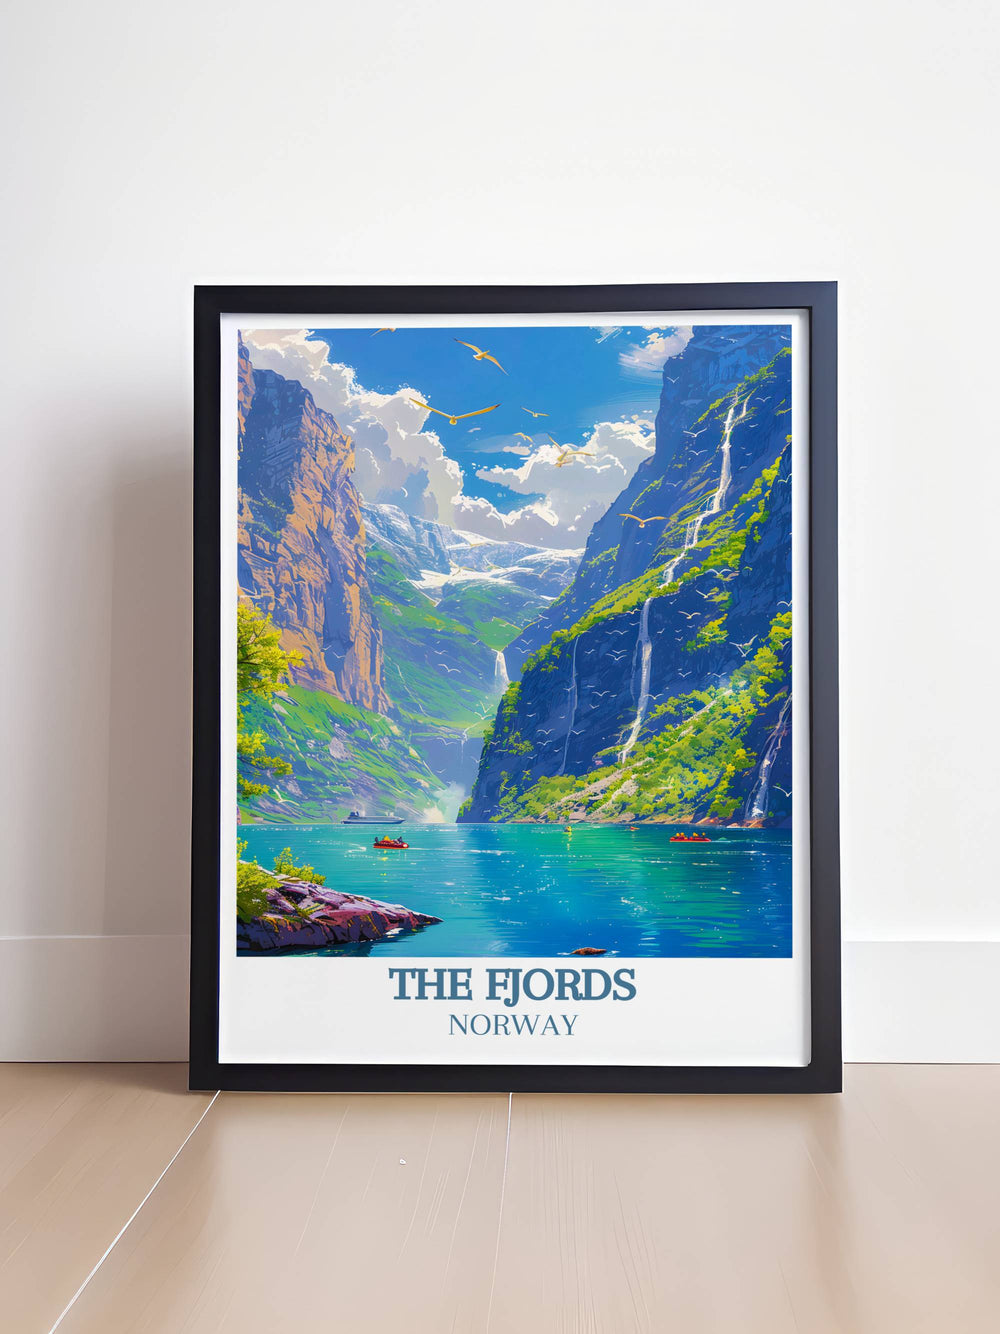 The Fjords Fine Art Prints showcasing the dramatic landscapes of Norways fjords, highlighting the interplay of light and shadow on towering cliffs and lush greenery, ideal for nature lovers.